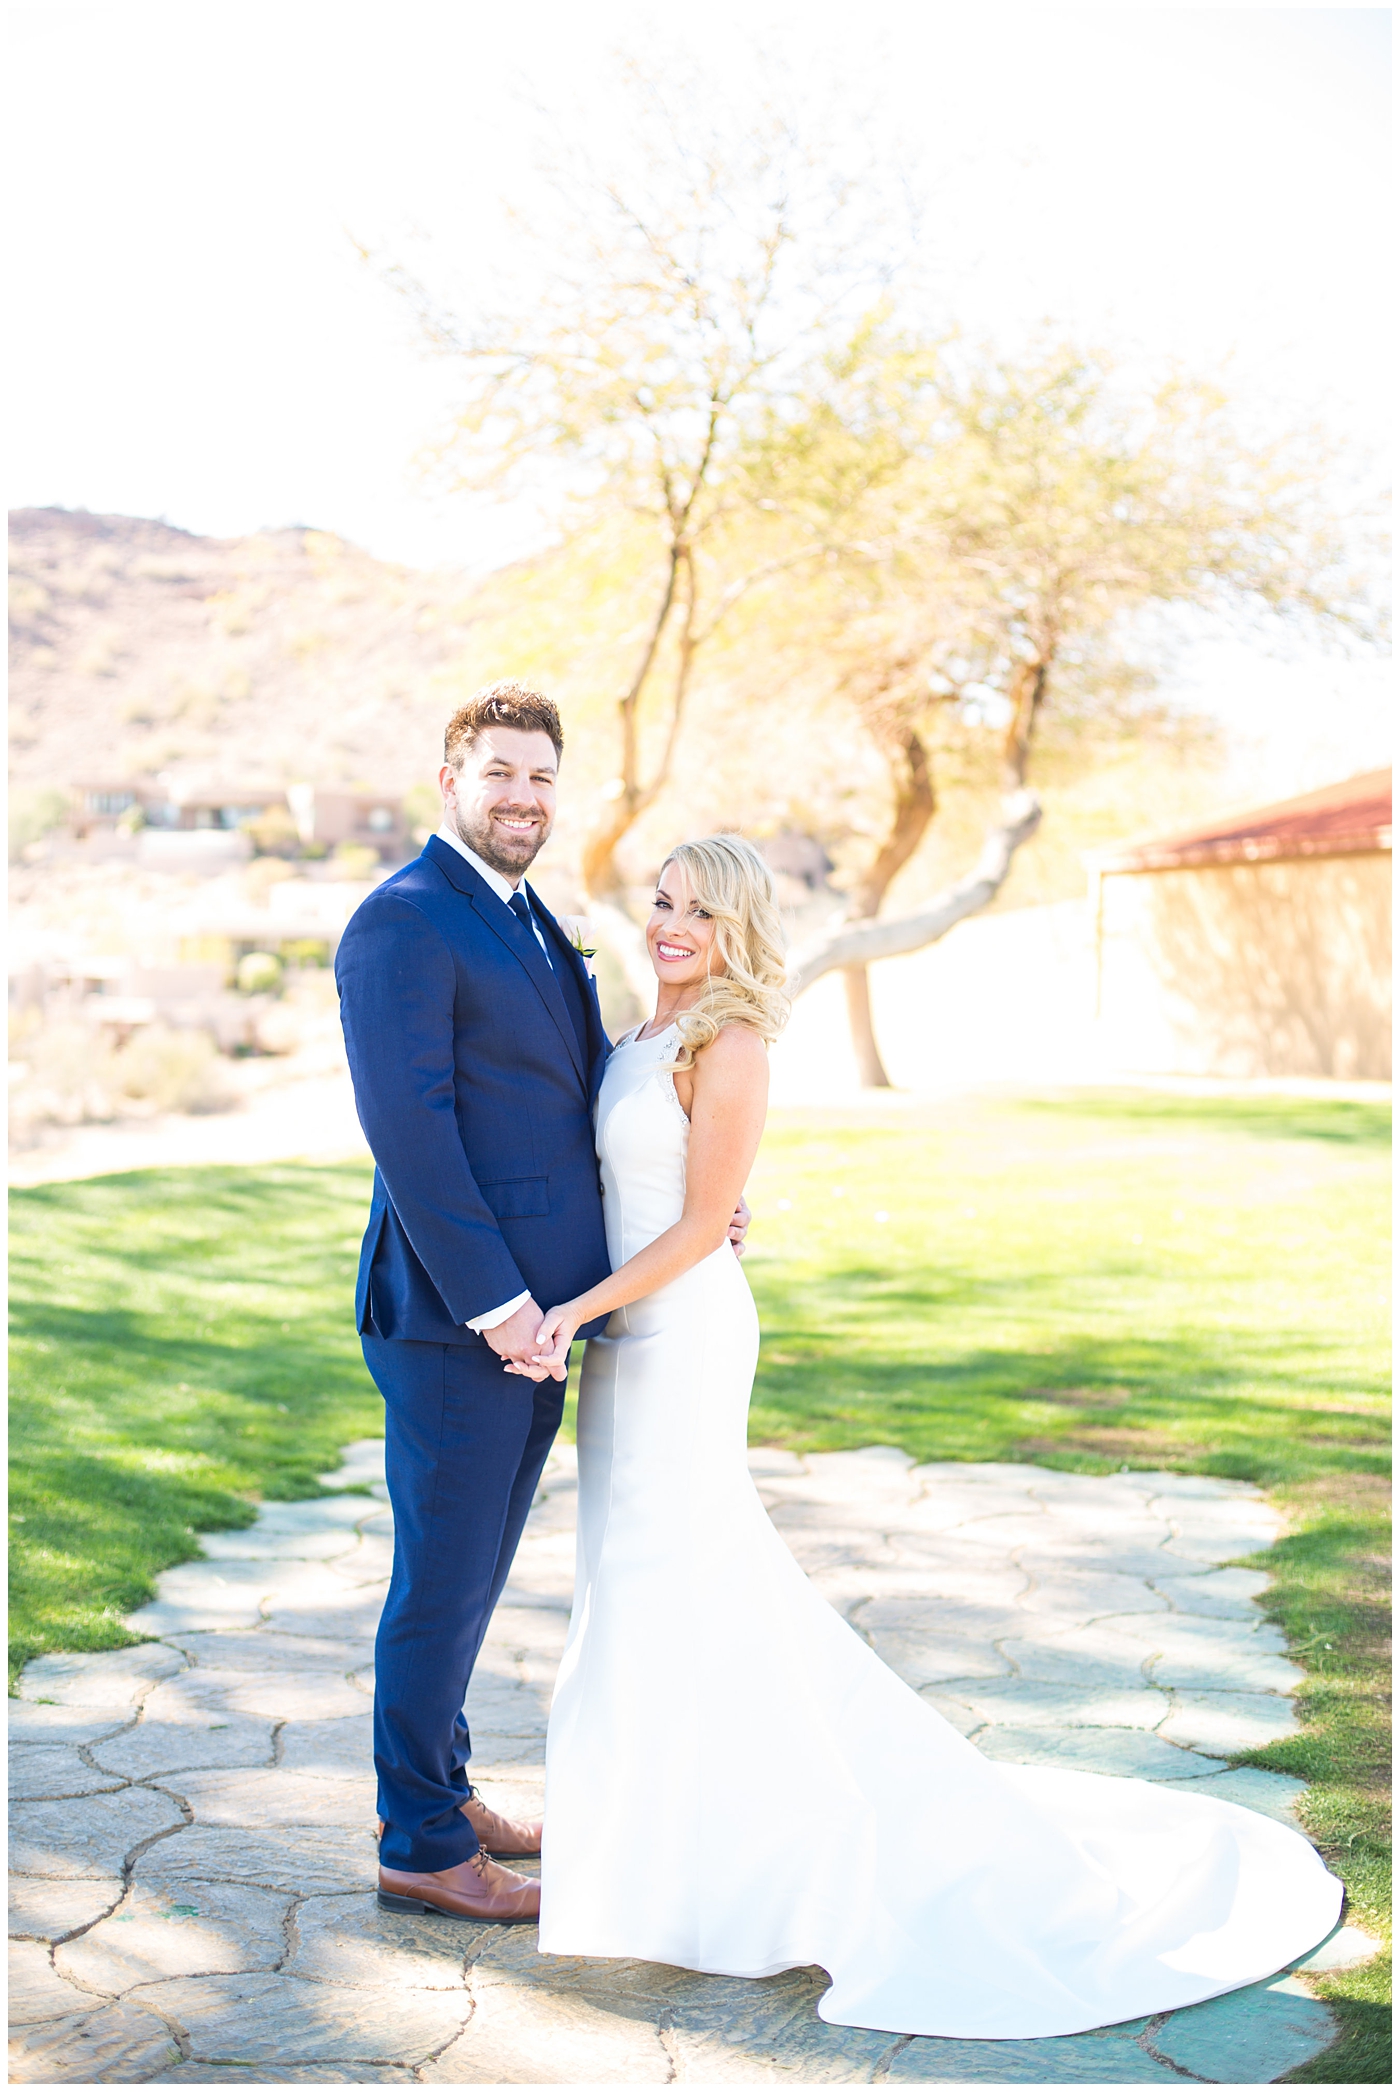 gorgeous bride with side swept hair in racerback pronovias dress with groom in navy suit and tie couple portrait on wedding day